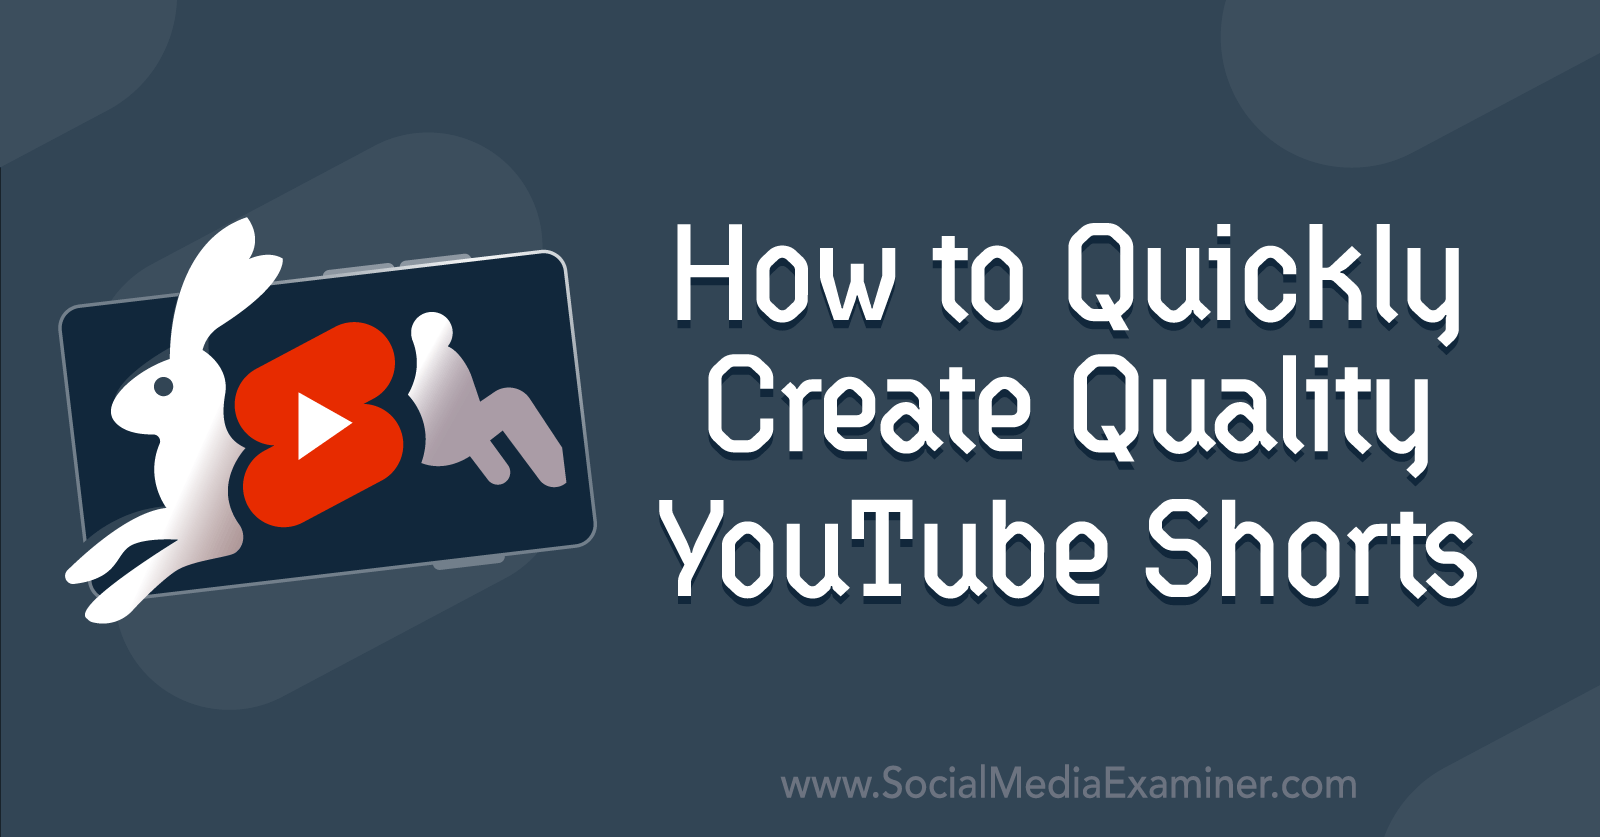 How to Quickly Create Quality YouTube Shorts by Social Media Examiner